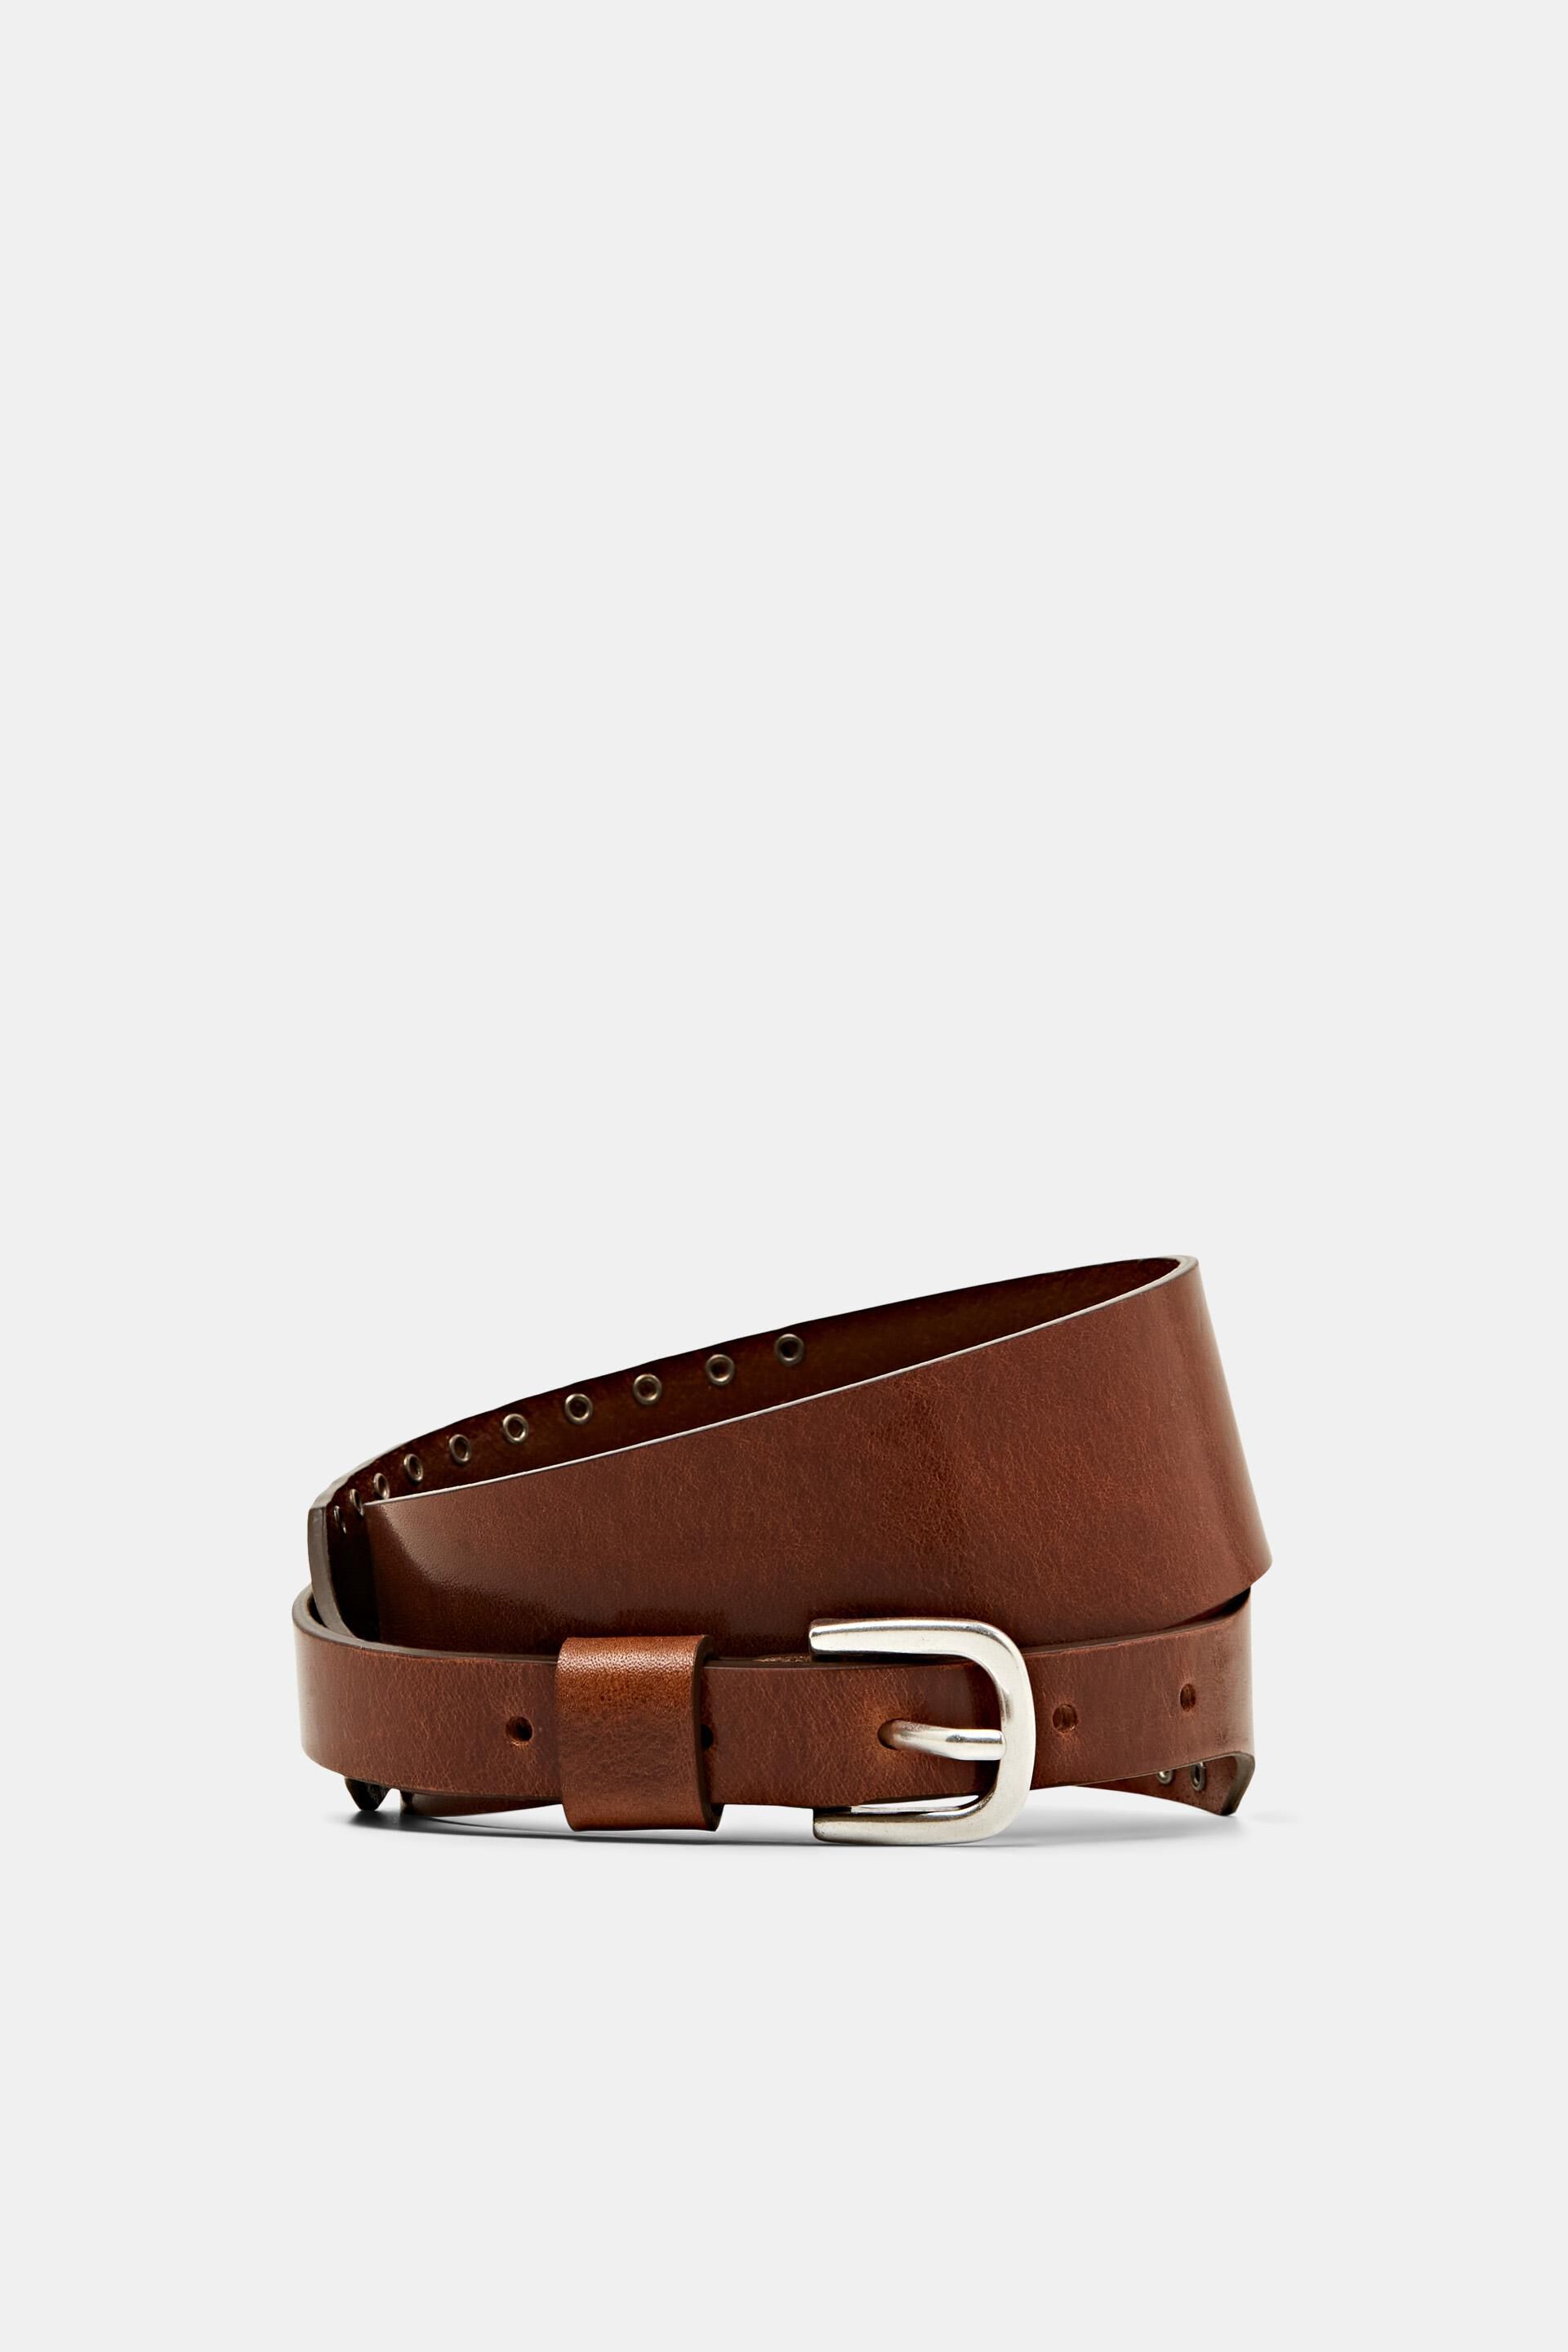 Esprit real leather belt studs, with Waist 100%